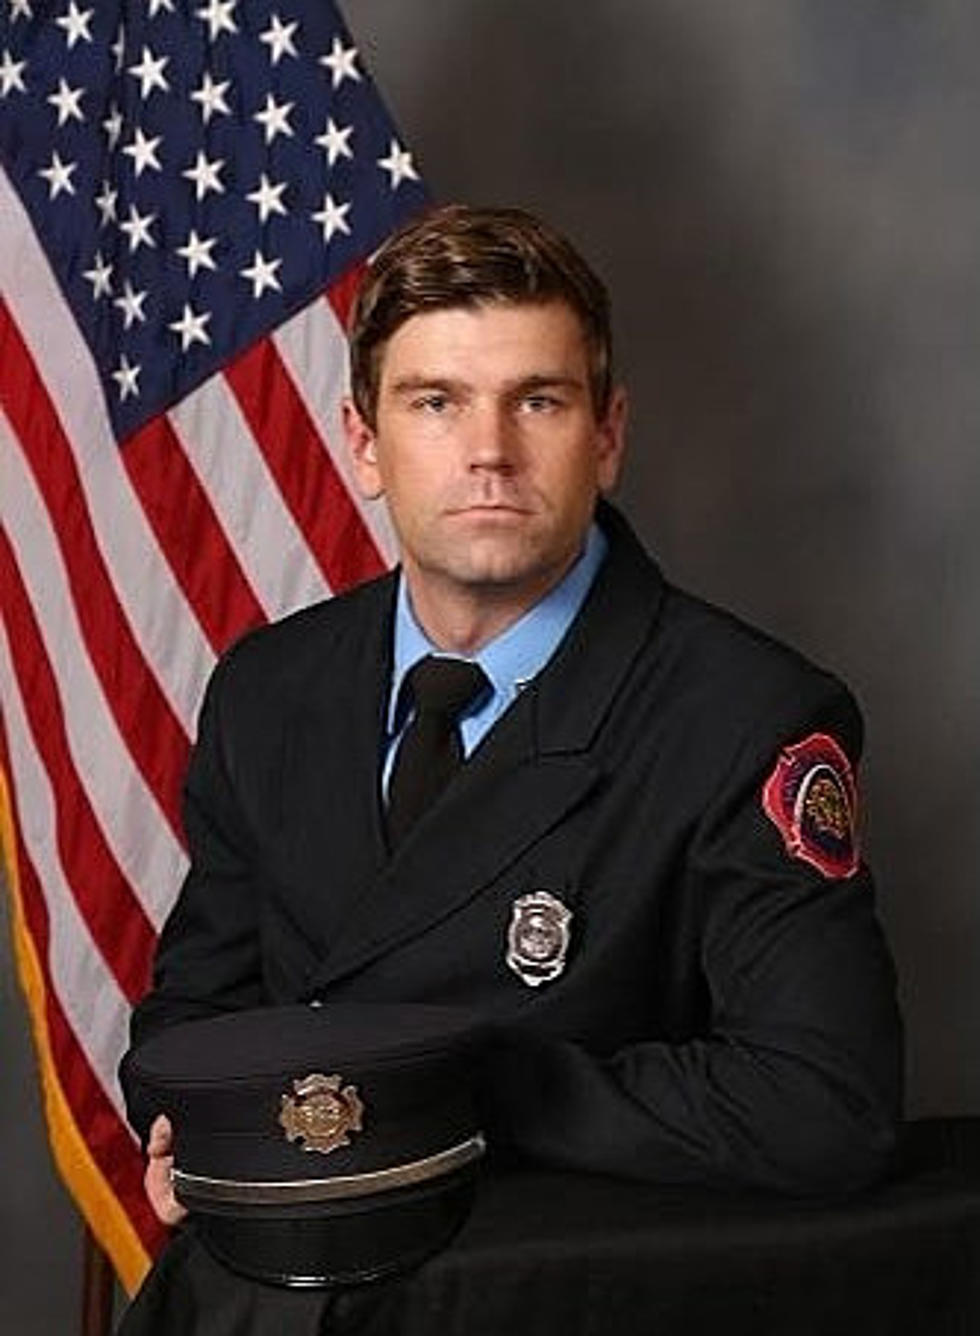 Parson Orders Flags to Half-Staff in Honor of St. Louis Fire Firefighter Polson